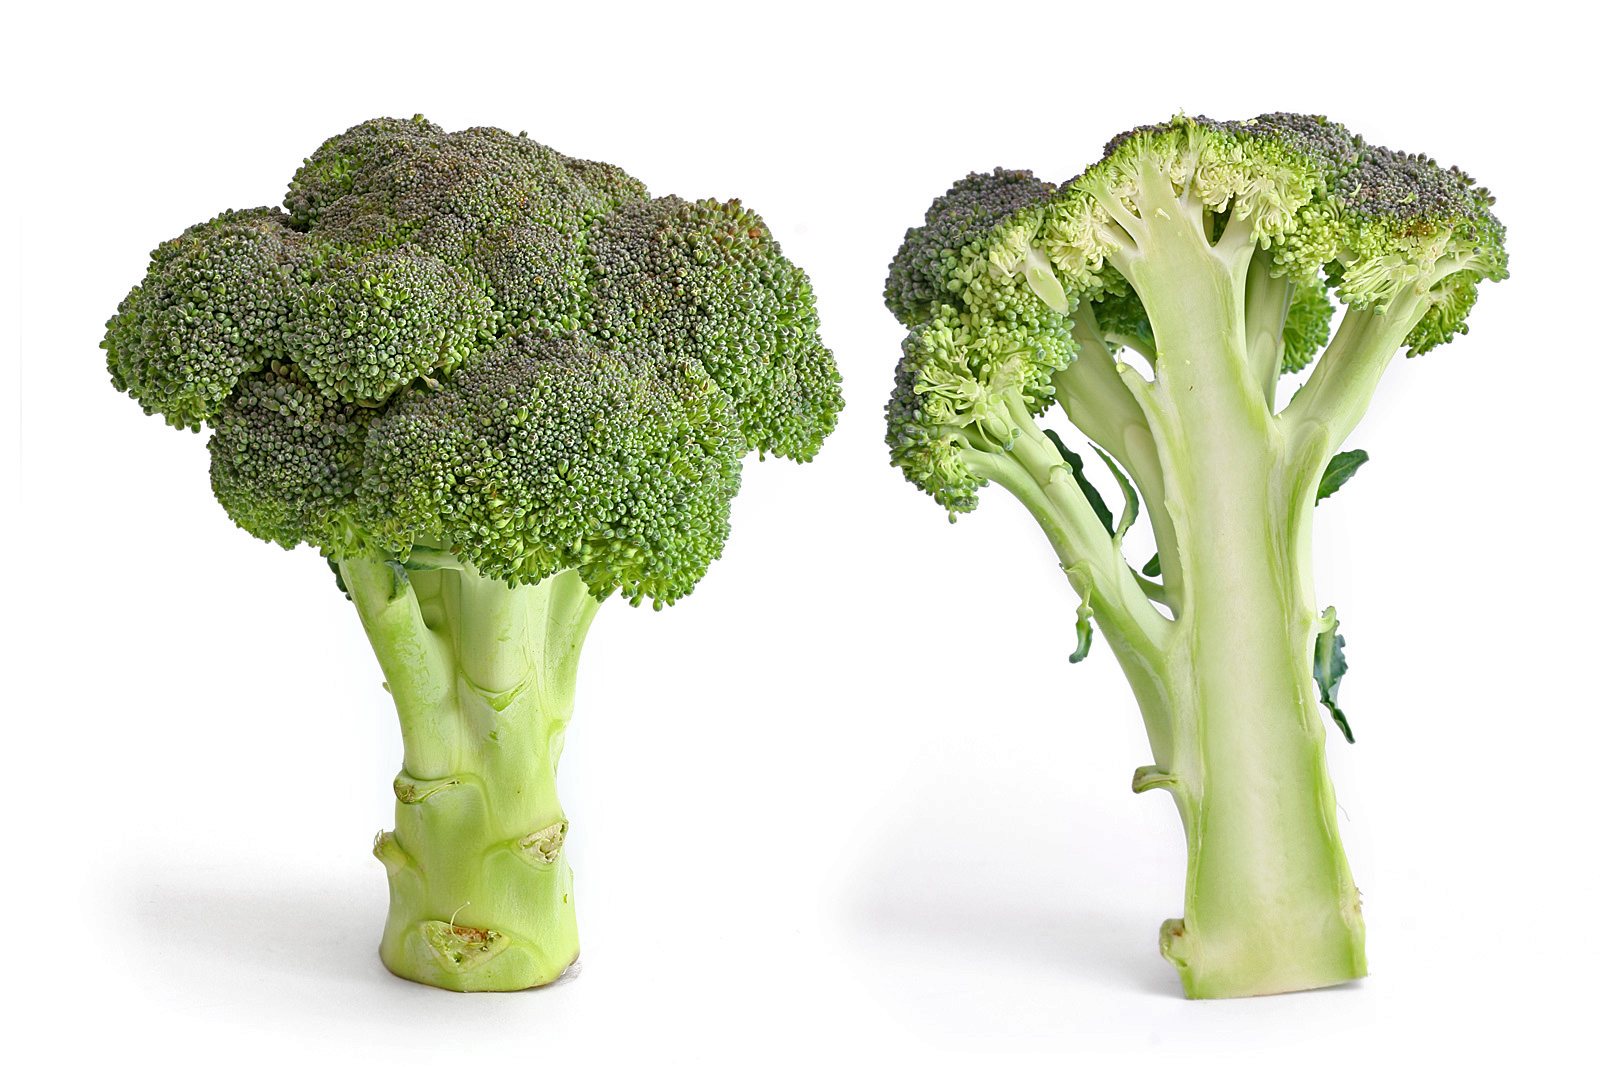 What are the broccoli health benefits, 7 health benefits of broccoli,health benefits of broccoli?